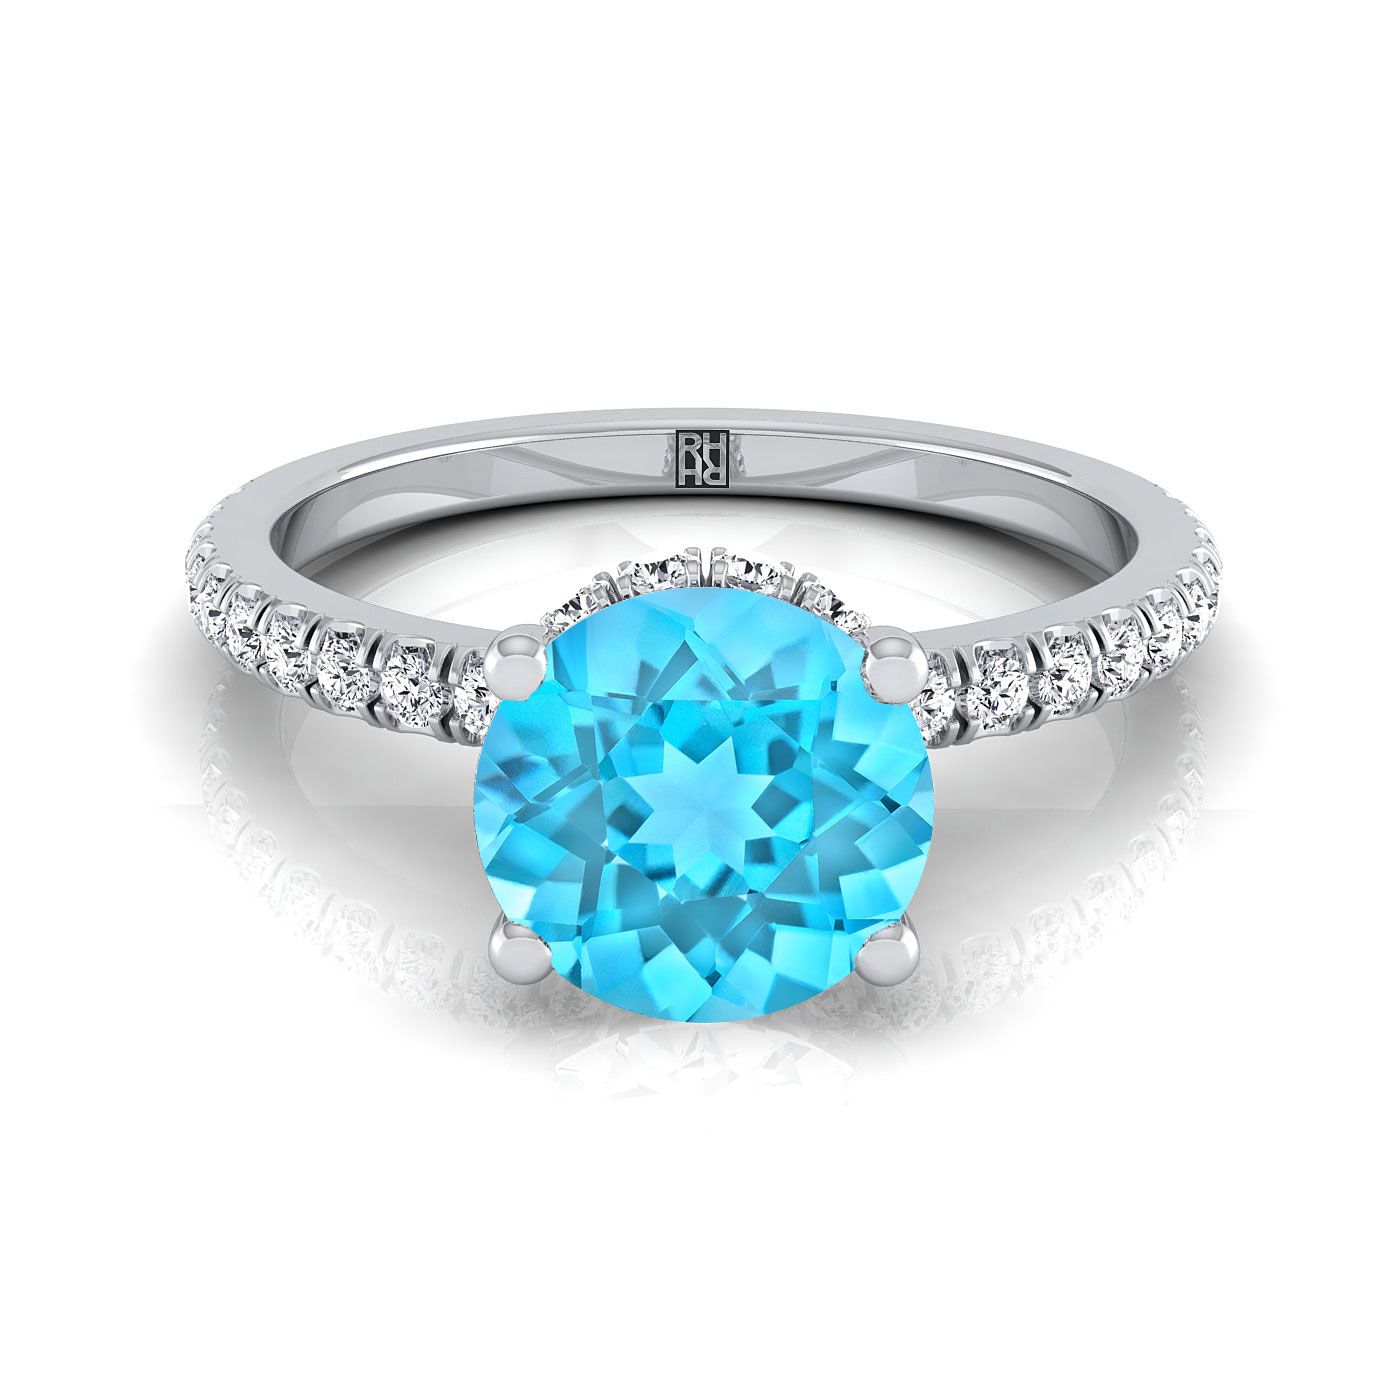 18K White Gold Round Brilliant Swiss Blue Topaz Secret Diamond Halo French Pave Solitaire Engagement Ring -1/3ctw